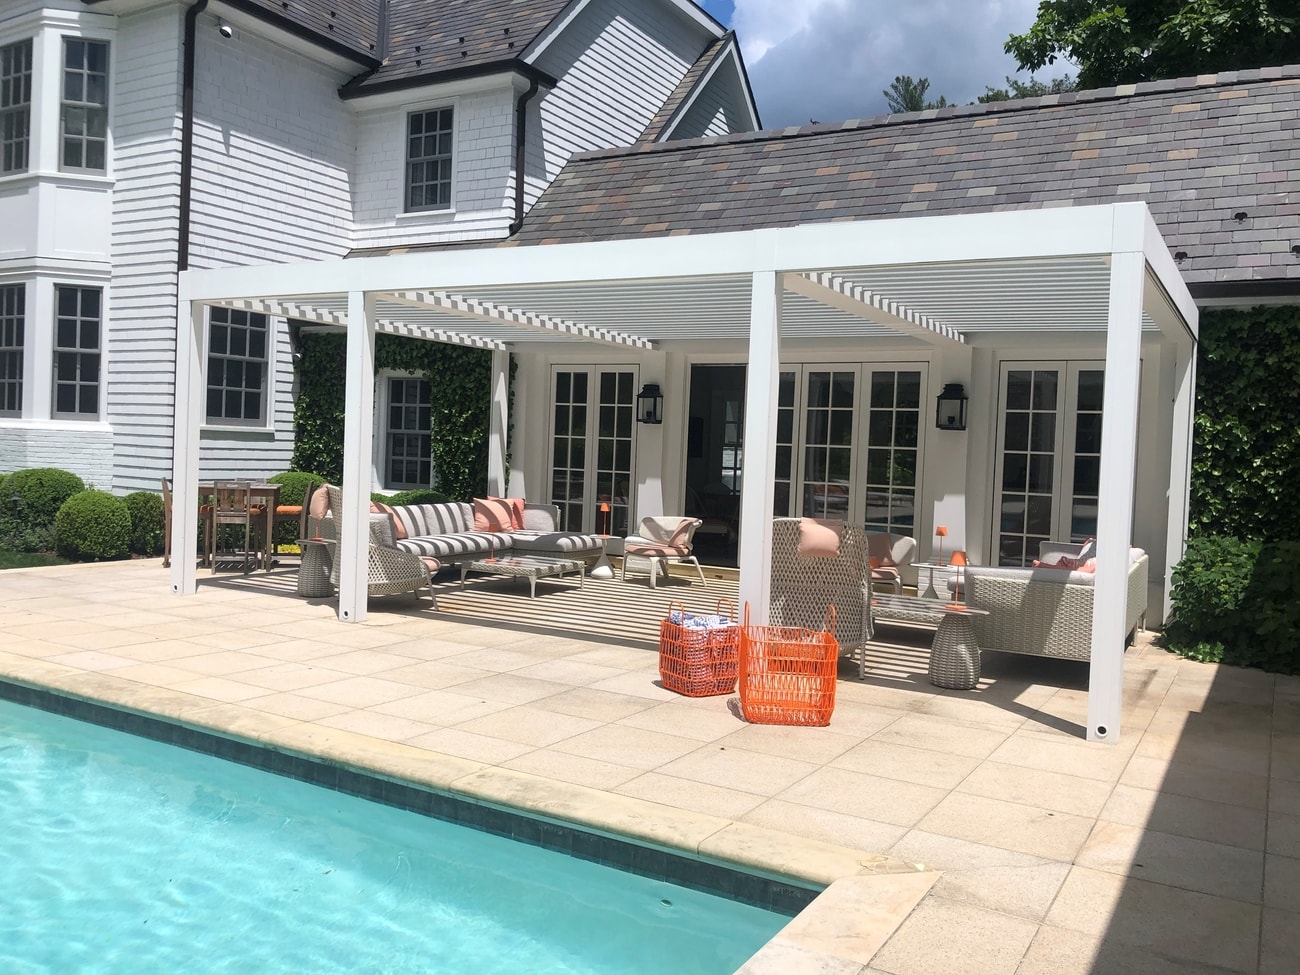 Have You Thought About Adding a Pergola to Your Deck? | Renson Outdoor